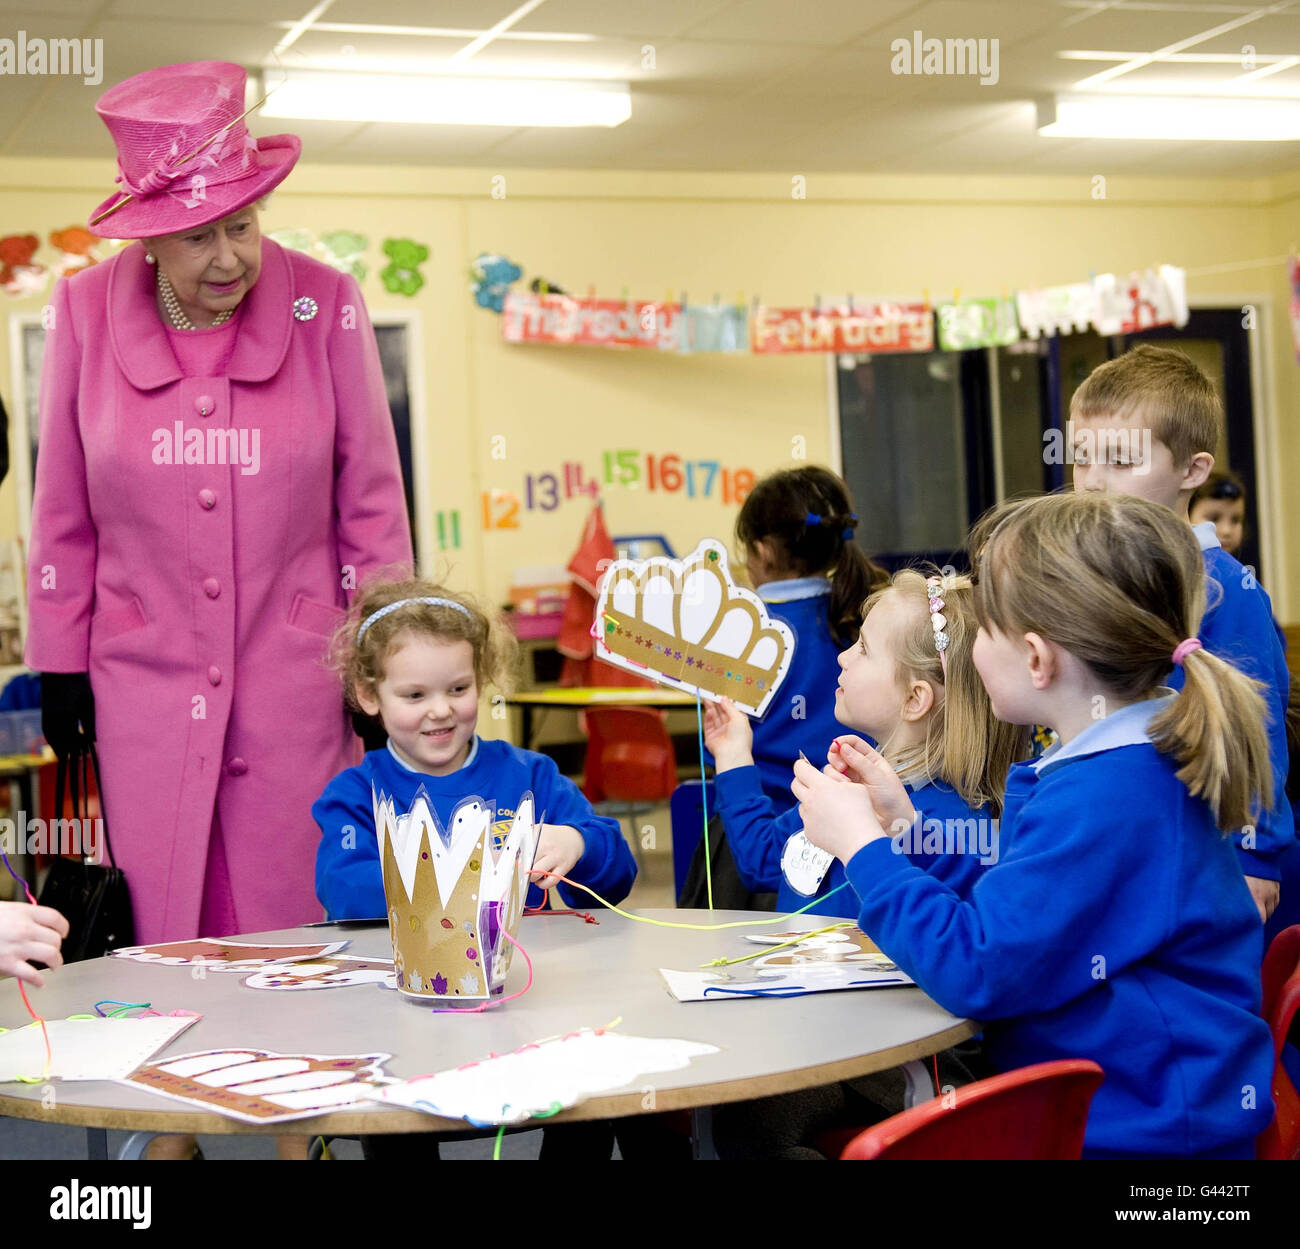 The Queen meets pupils at King's Court First School, in Old Windsor, Berkshire, on the occasion of its 50th anniversary. Stock Photo